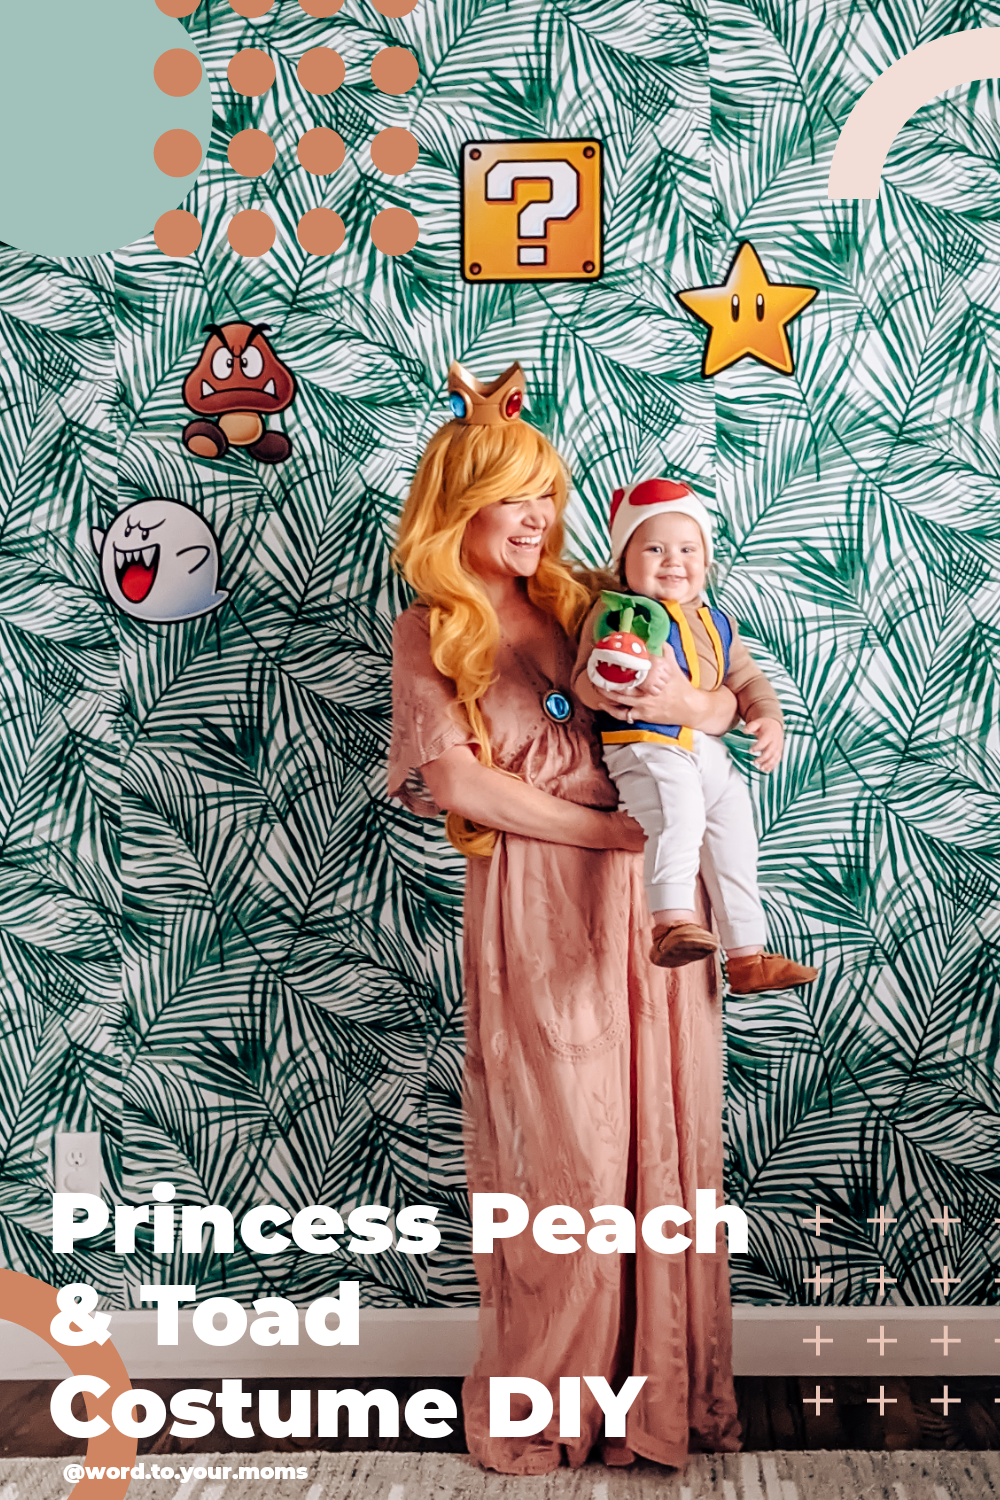 Princess Peach and Toad DIY Costume: Get the Look!